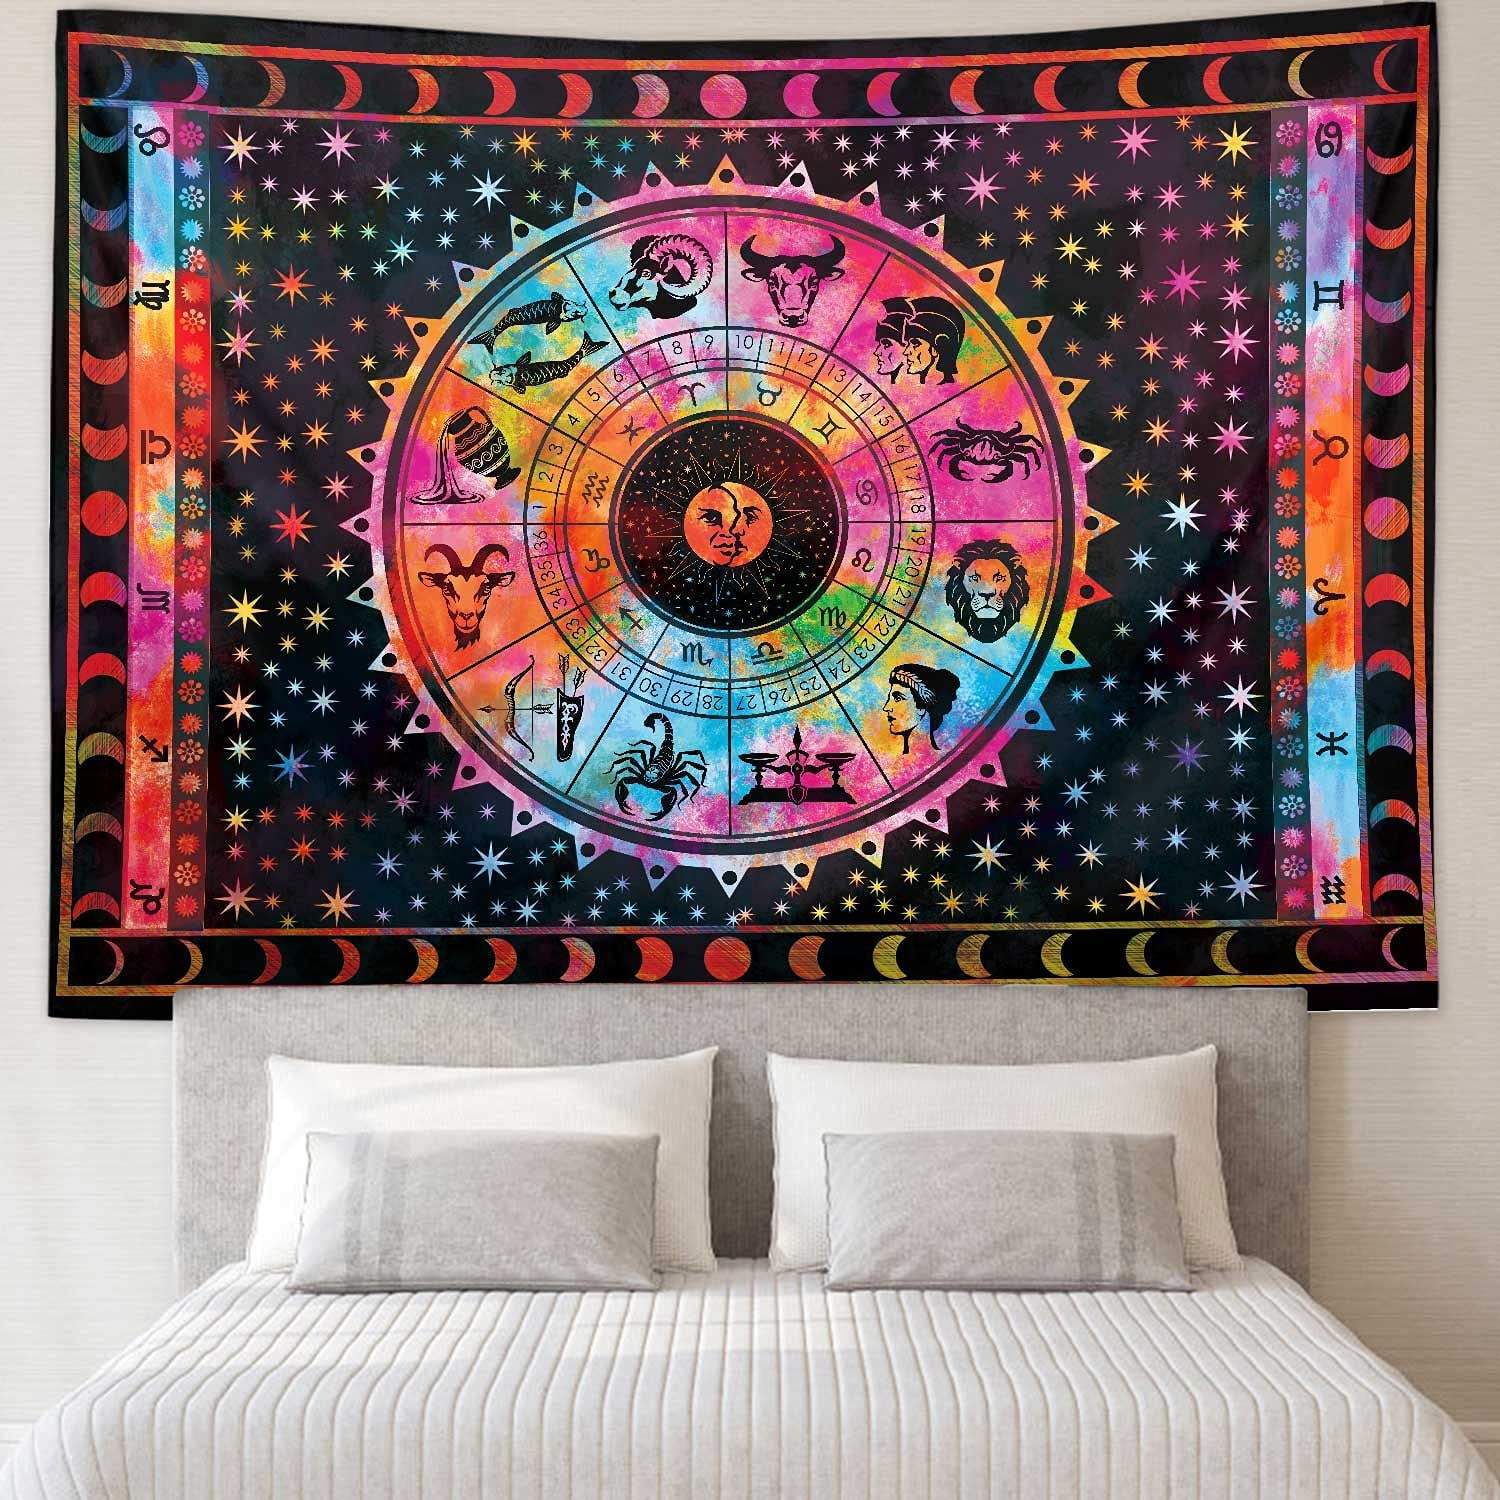 Details about   Indian Wall Hanging Cotton Fabric Tapestry Small Zodiac Sunsign Design Poster 